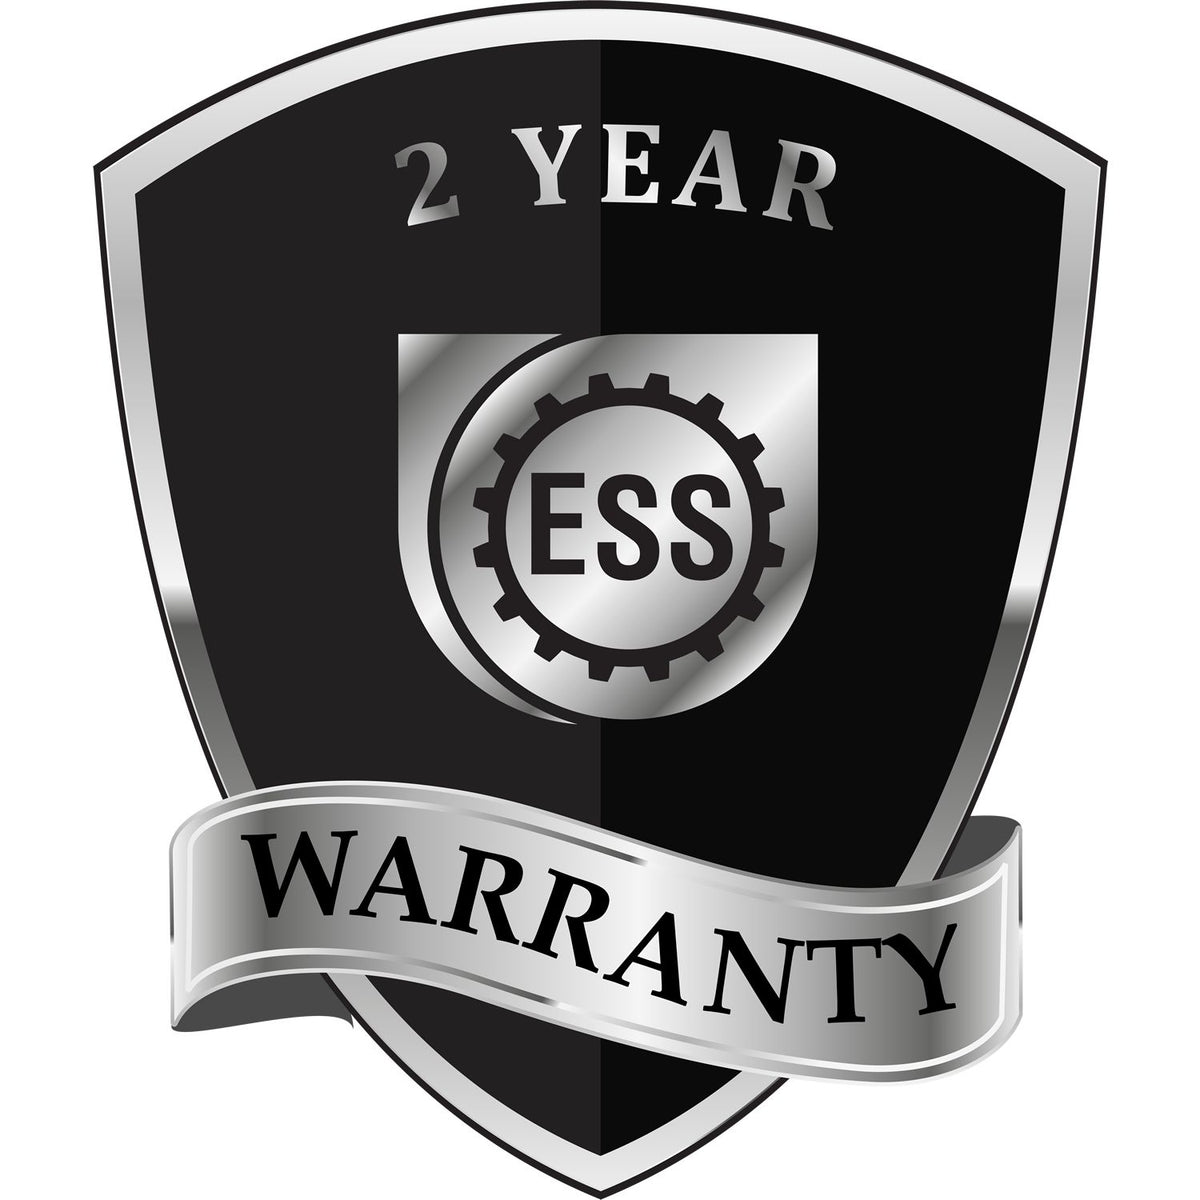 A badge or emblem showing a warranty icon for the Soft Illinois Professional Engineer Seal